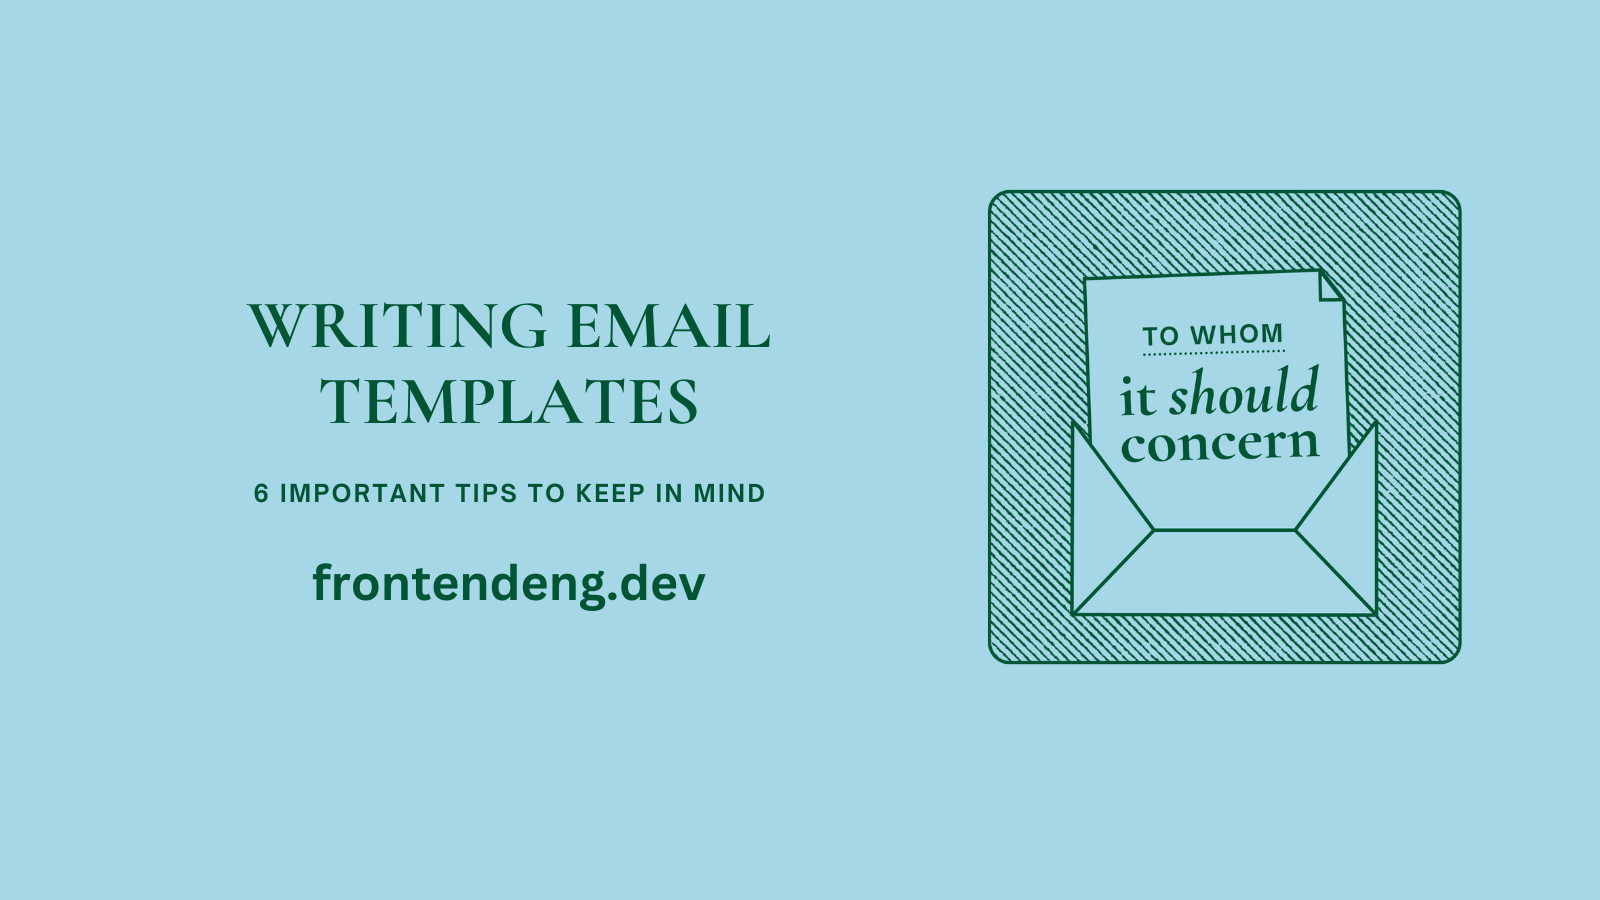 6 thing you should keep in mind when writing email templates